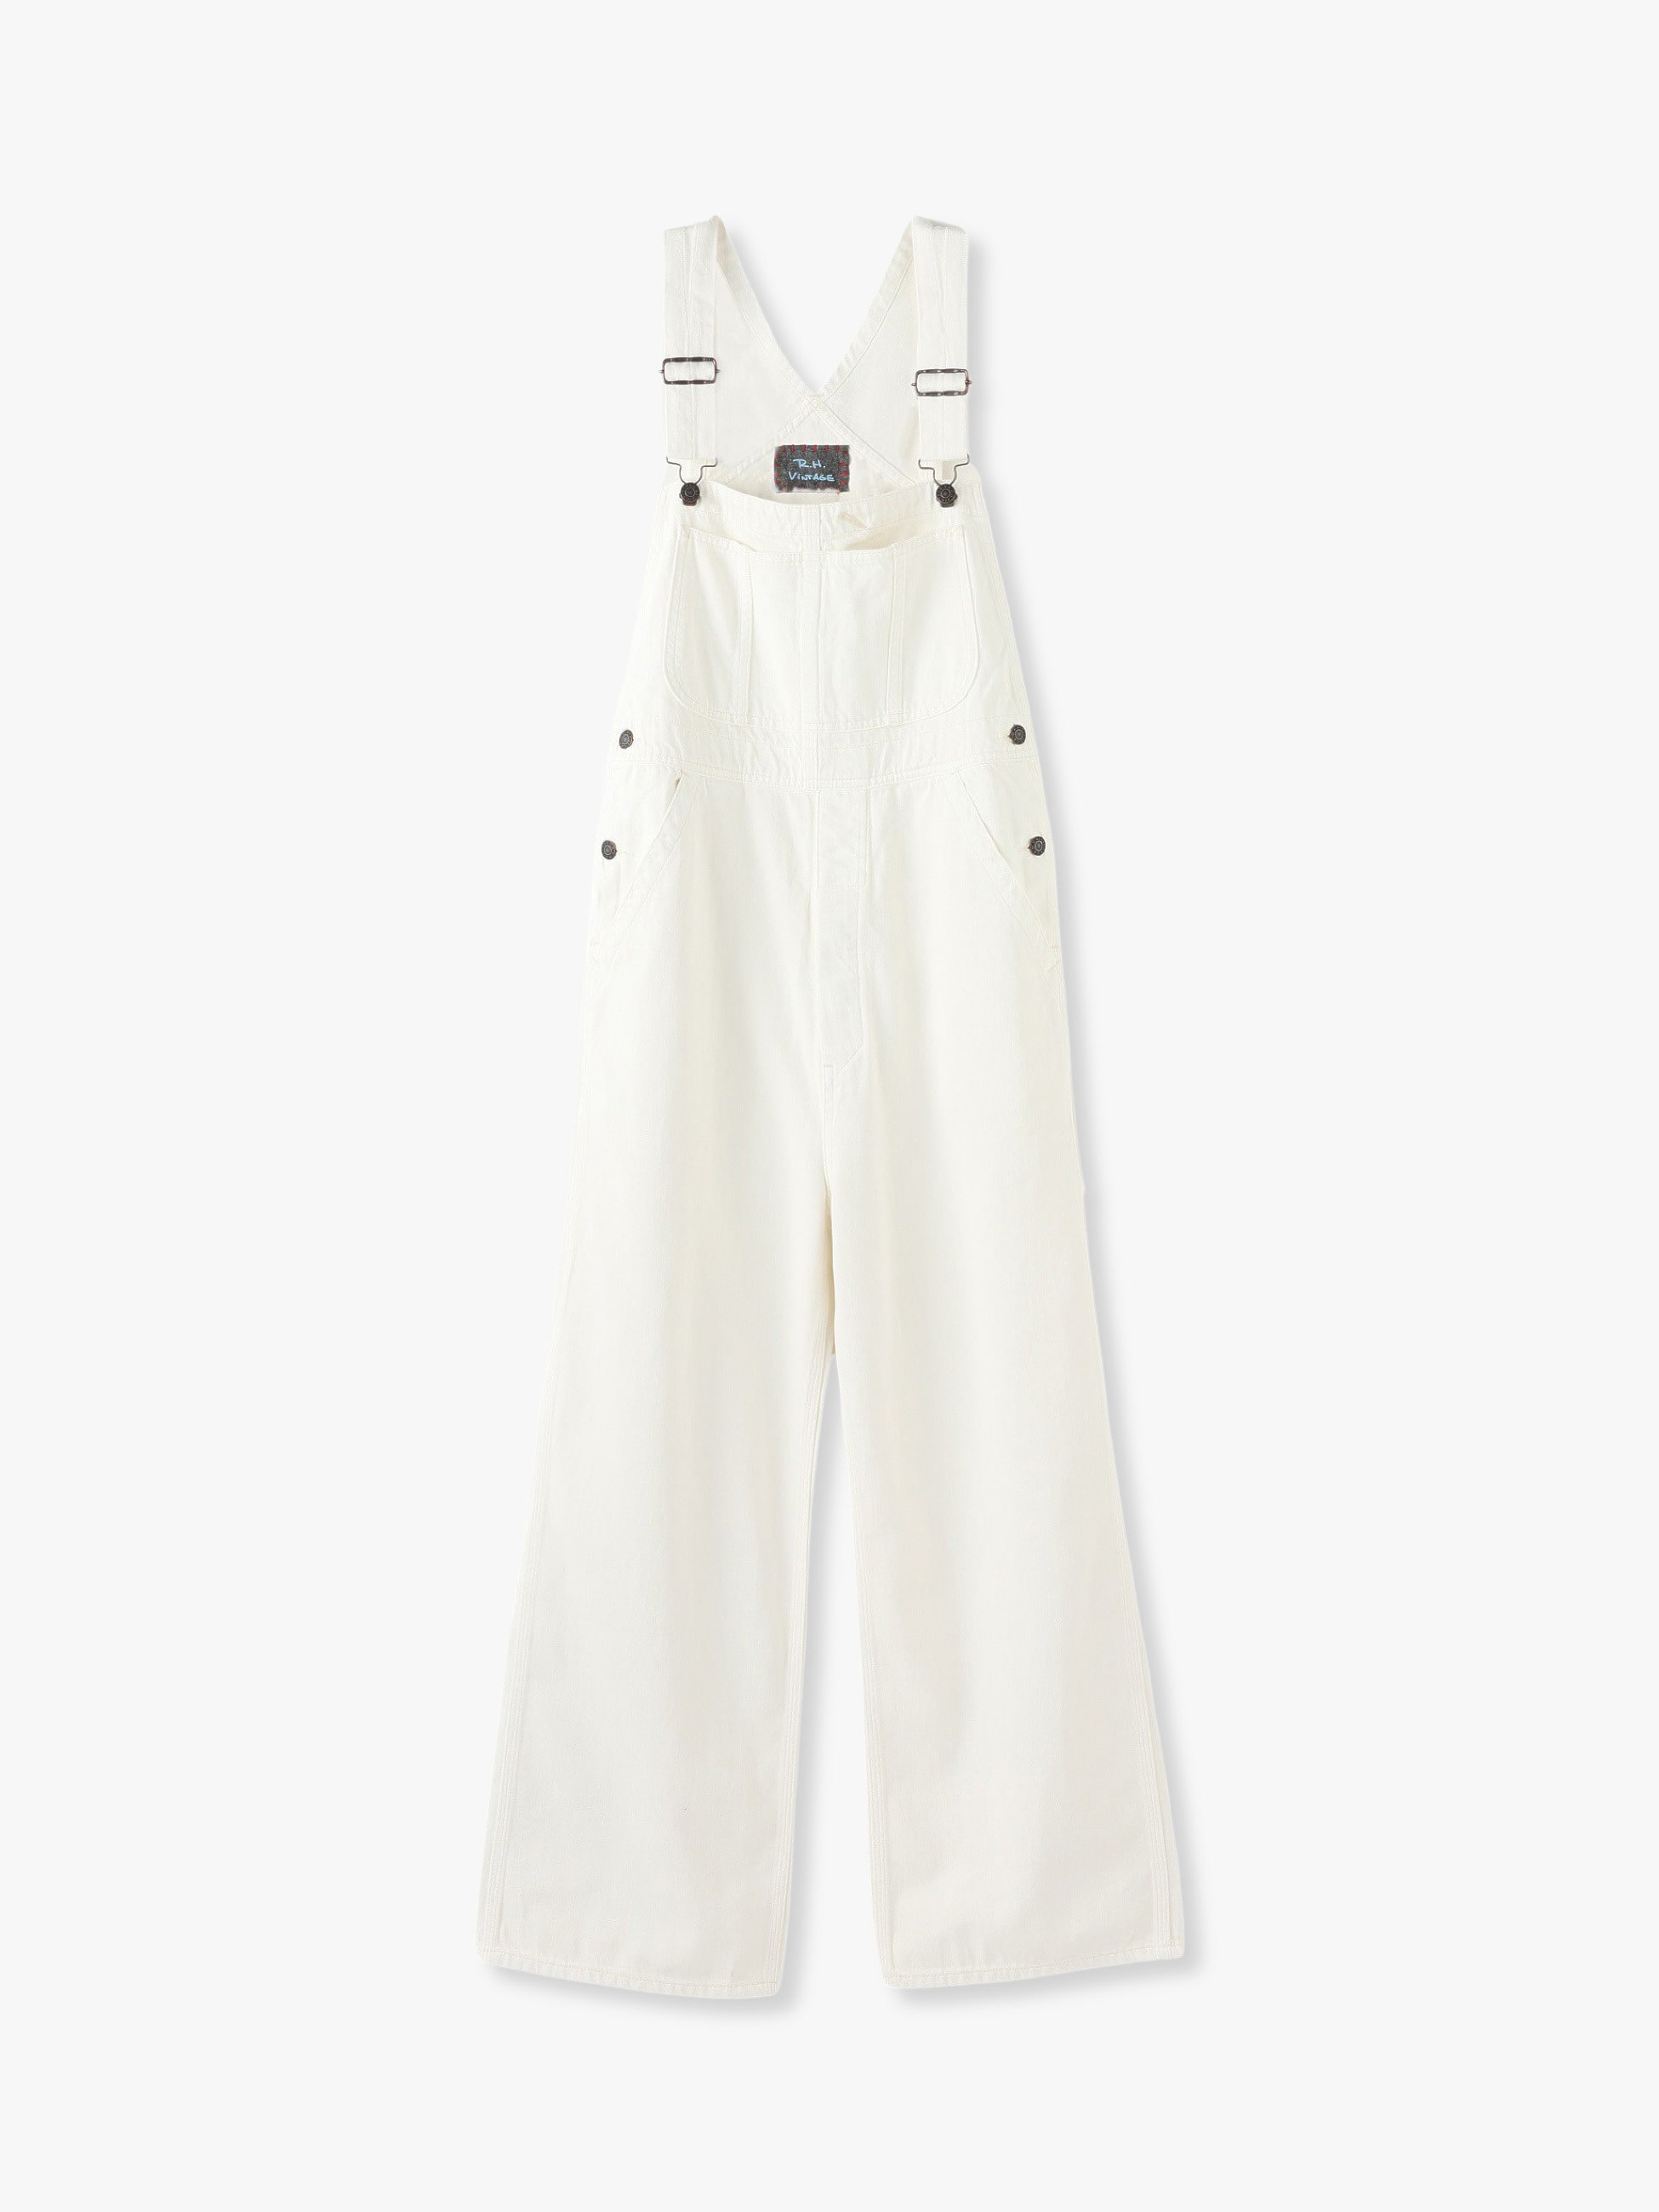 RH Vintage ロンハーマンヴィンテージ / White Overall 激安店舗 ...